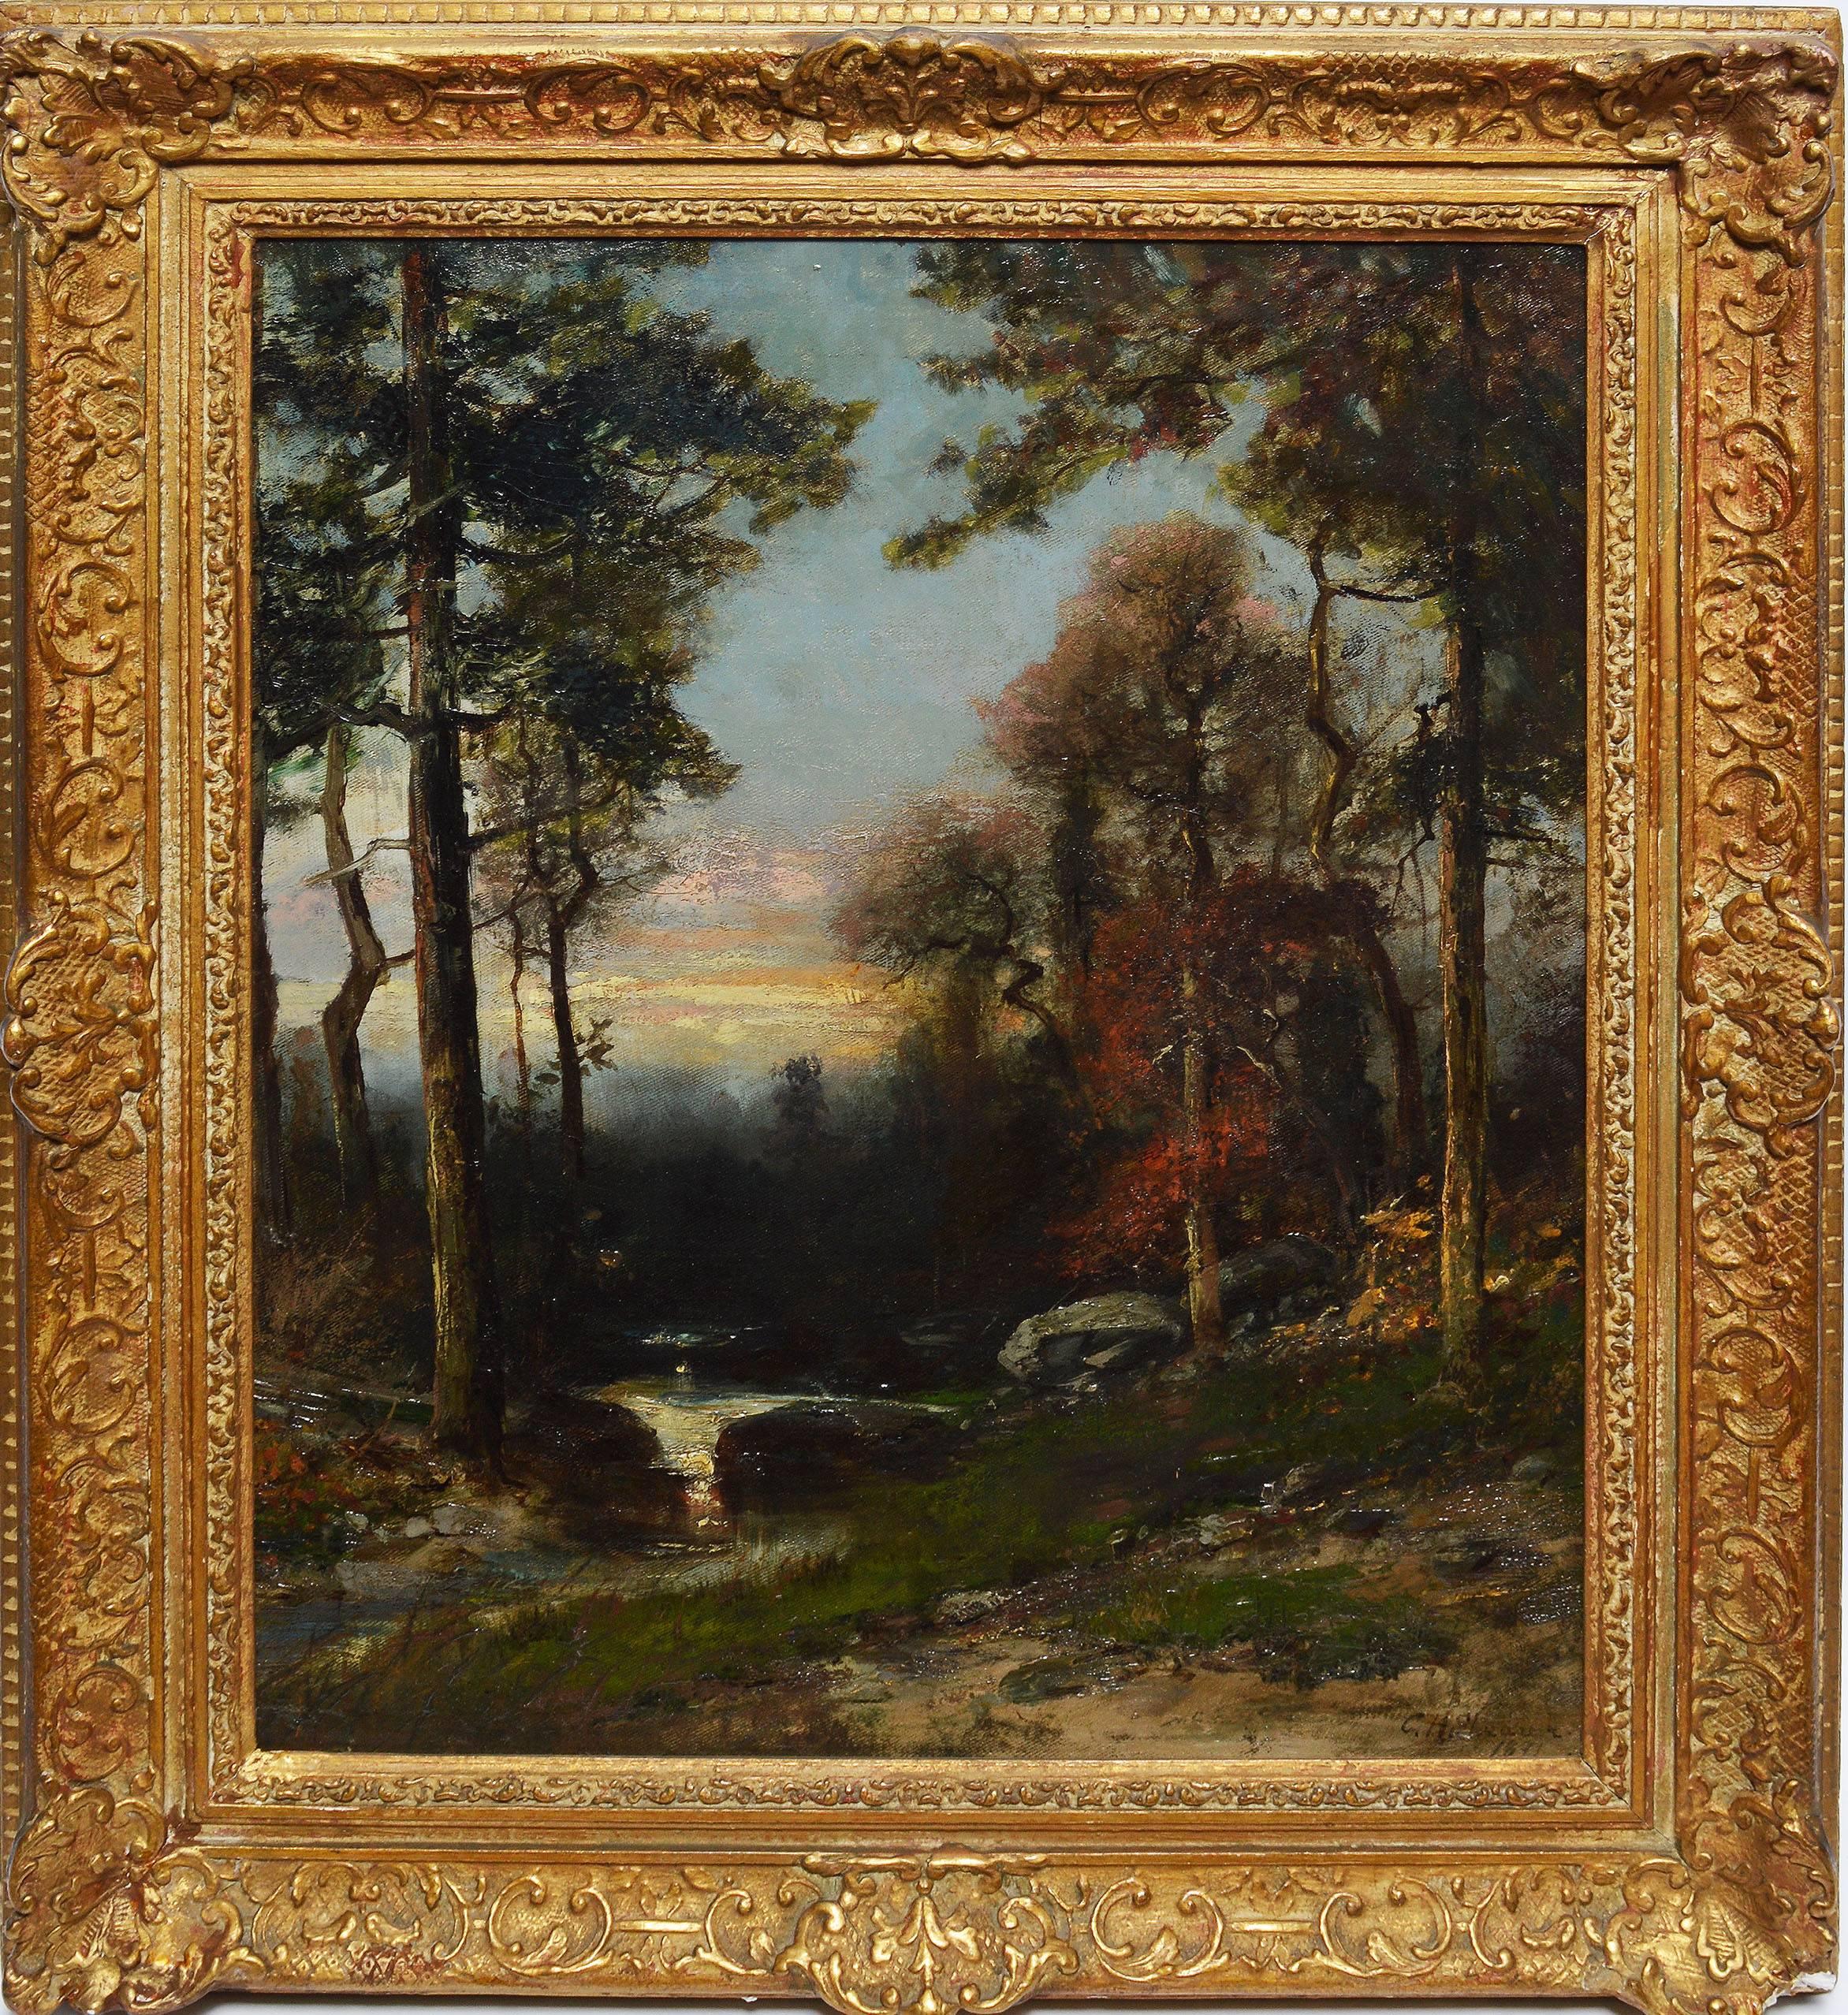 Impressionist landscape painting of a forest sunset by Christopher Shearer (1846-1926). Oil on board, circa 1890. Signed lower right, "C.H. Shearer 1891". Displayed in a period giltwood frame.  Image size, 16"L x 20"H, overall, 21"L x 26"H.
